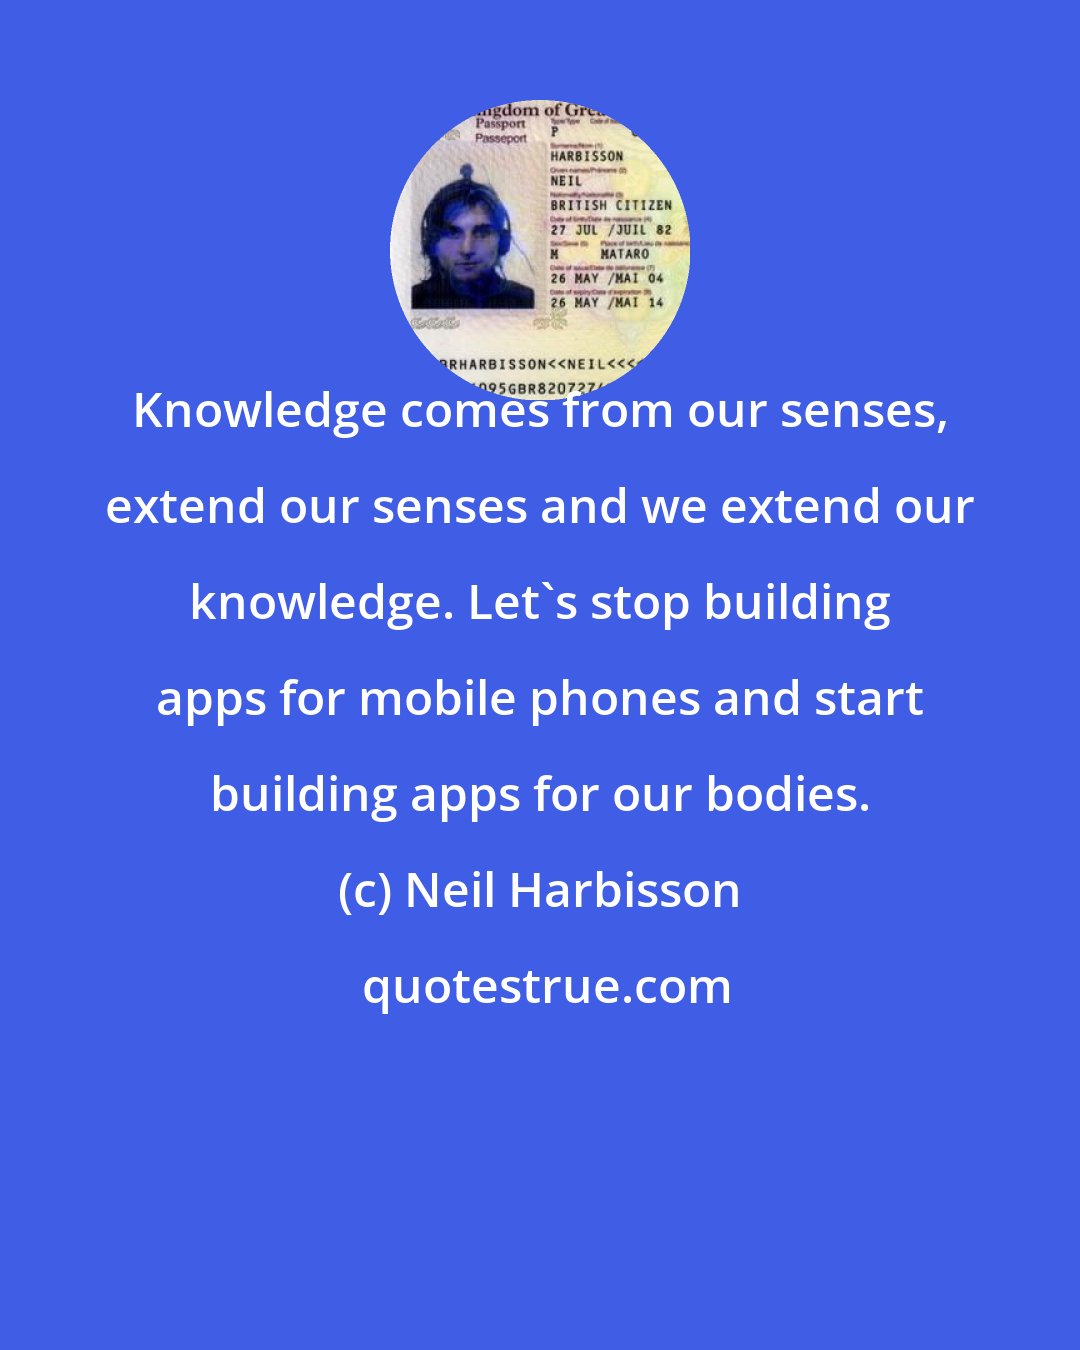 Neil Harbisson: Knowledge comes from our senses, extend our senses and we extend our knowledge. Let's stop building apps for mobile phones and start building apps for our bodies.